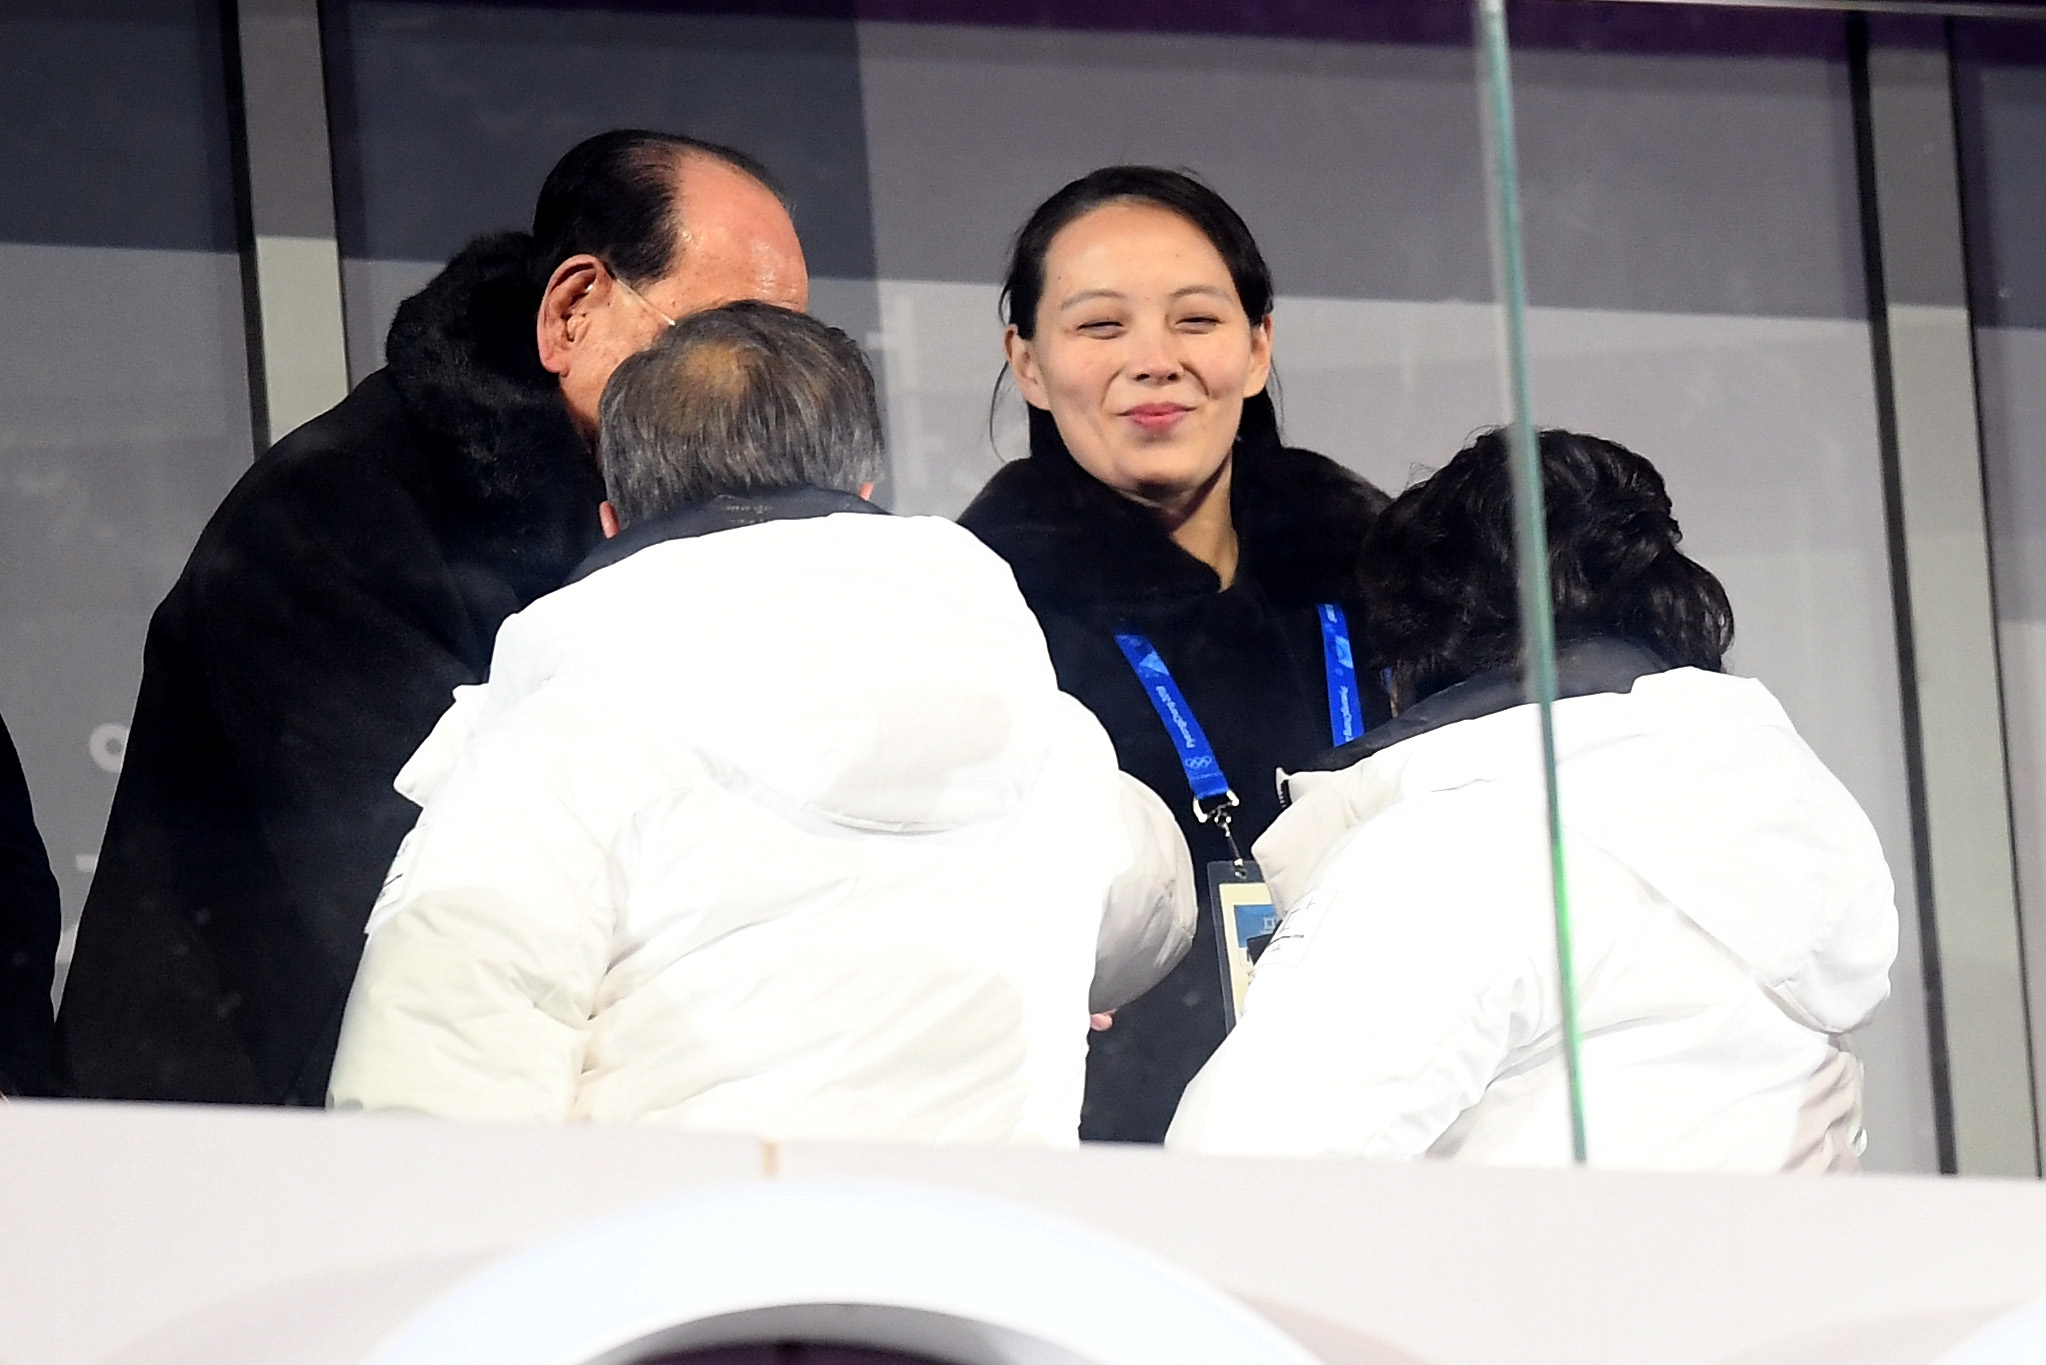 PHOTO: Kim Yo-Jong shakes hands with  President of South Korea, Moon Jae-in during the Opening Ceremony of the PyeongChang 2018 Winter Olympic Games at PyeongChang Olympic Stadium on Feb. 9, 2018 